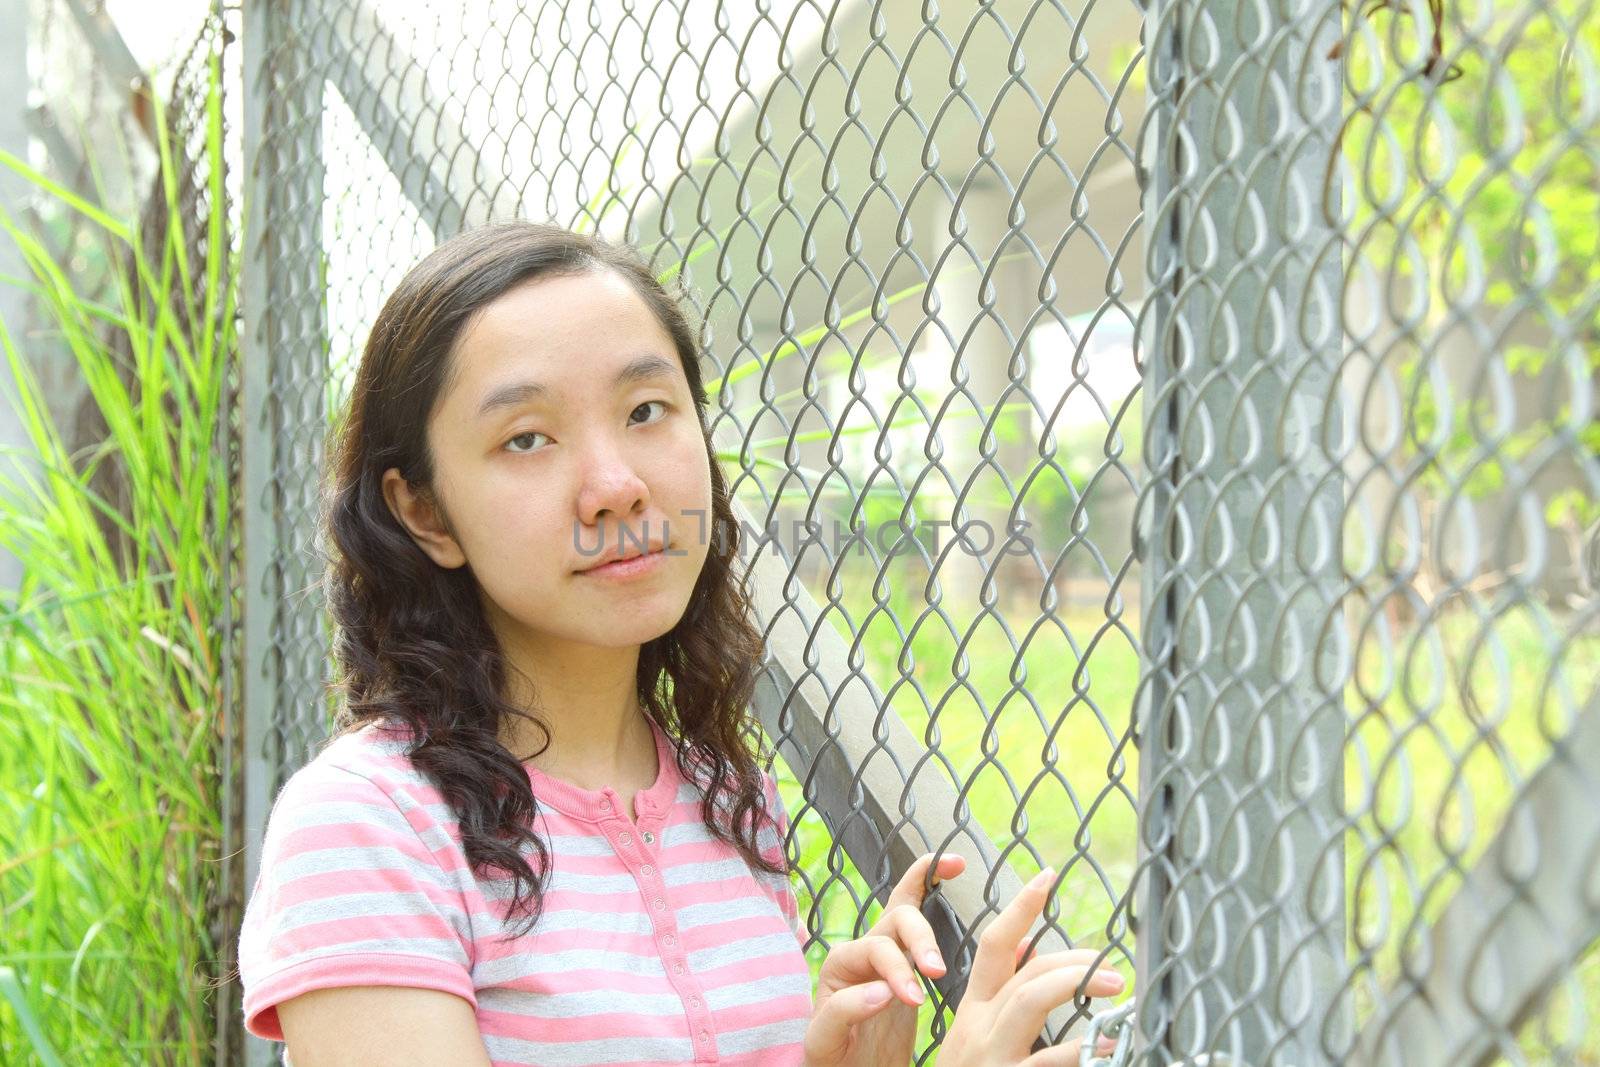 Asian girl with sad face, standing next to a net. She wants to escape from now's life. 